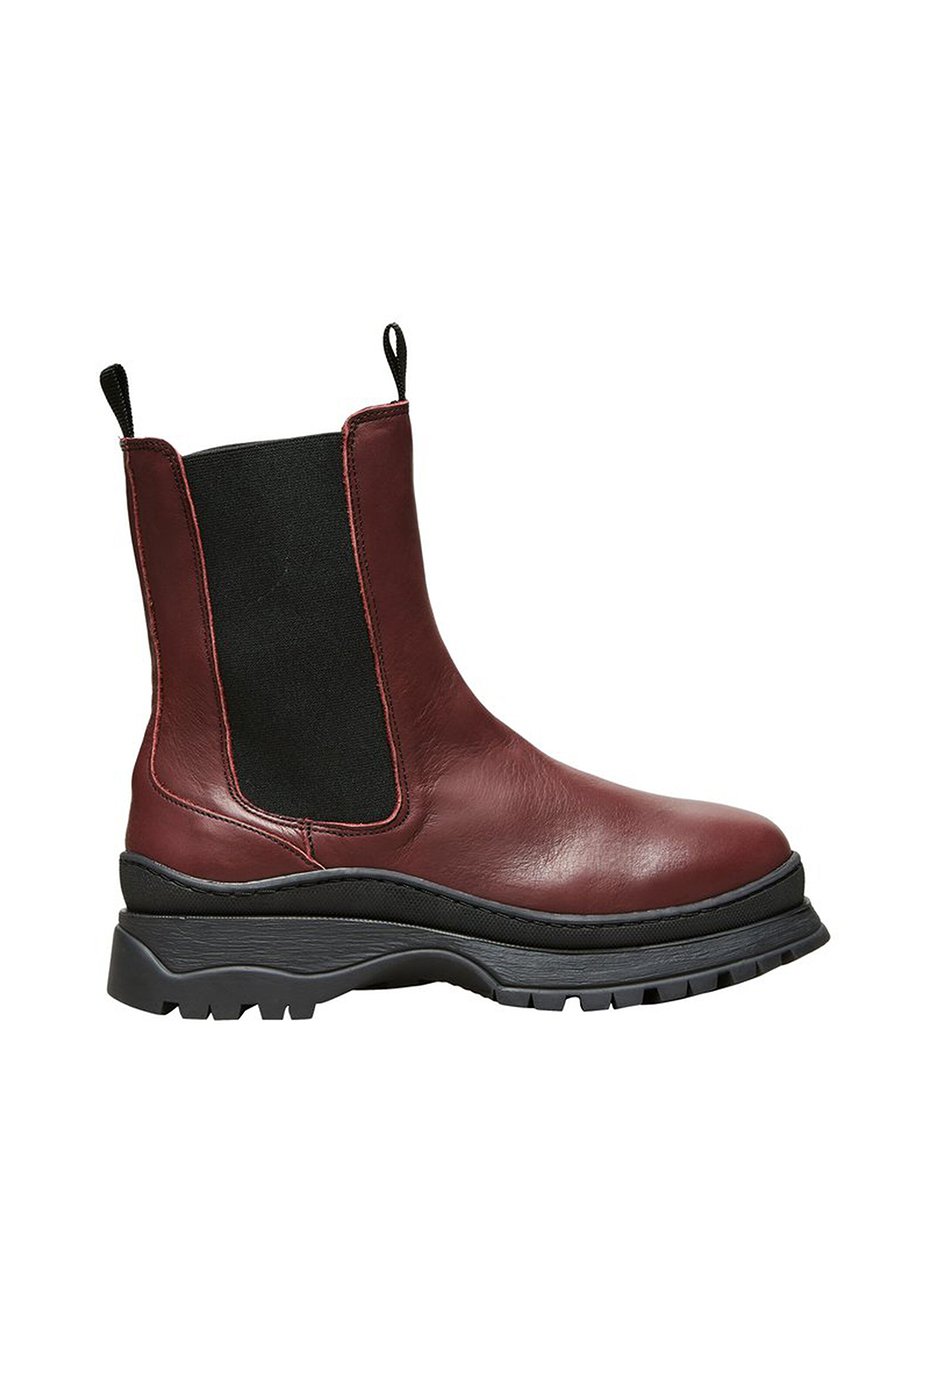 Selected Femme Burgundy Lucy Leather Chelsea Boot